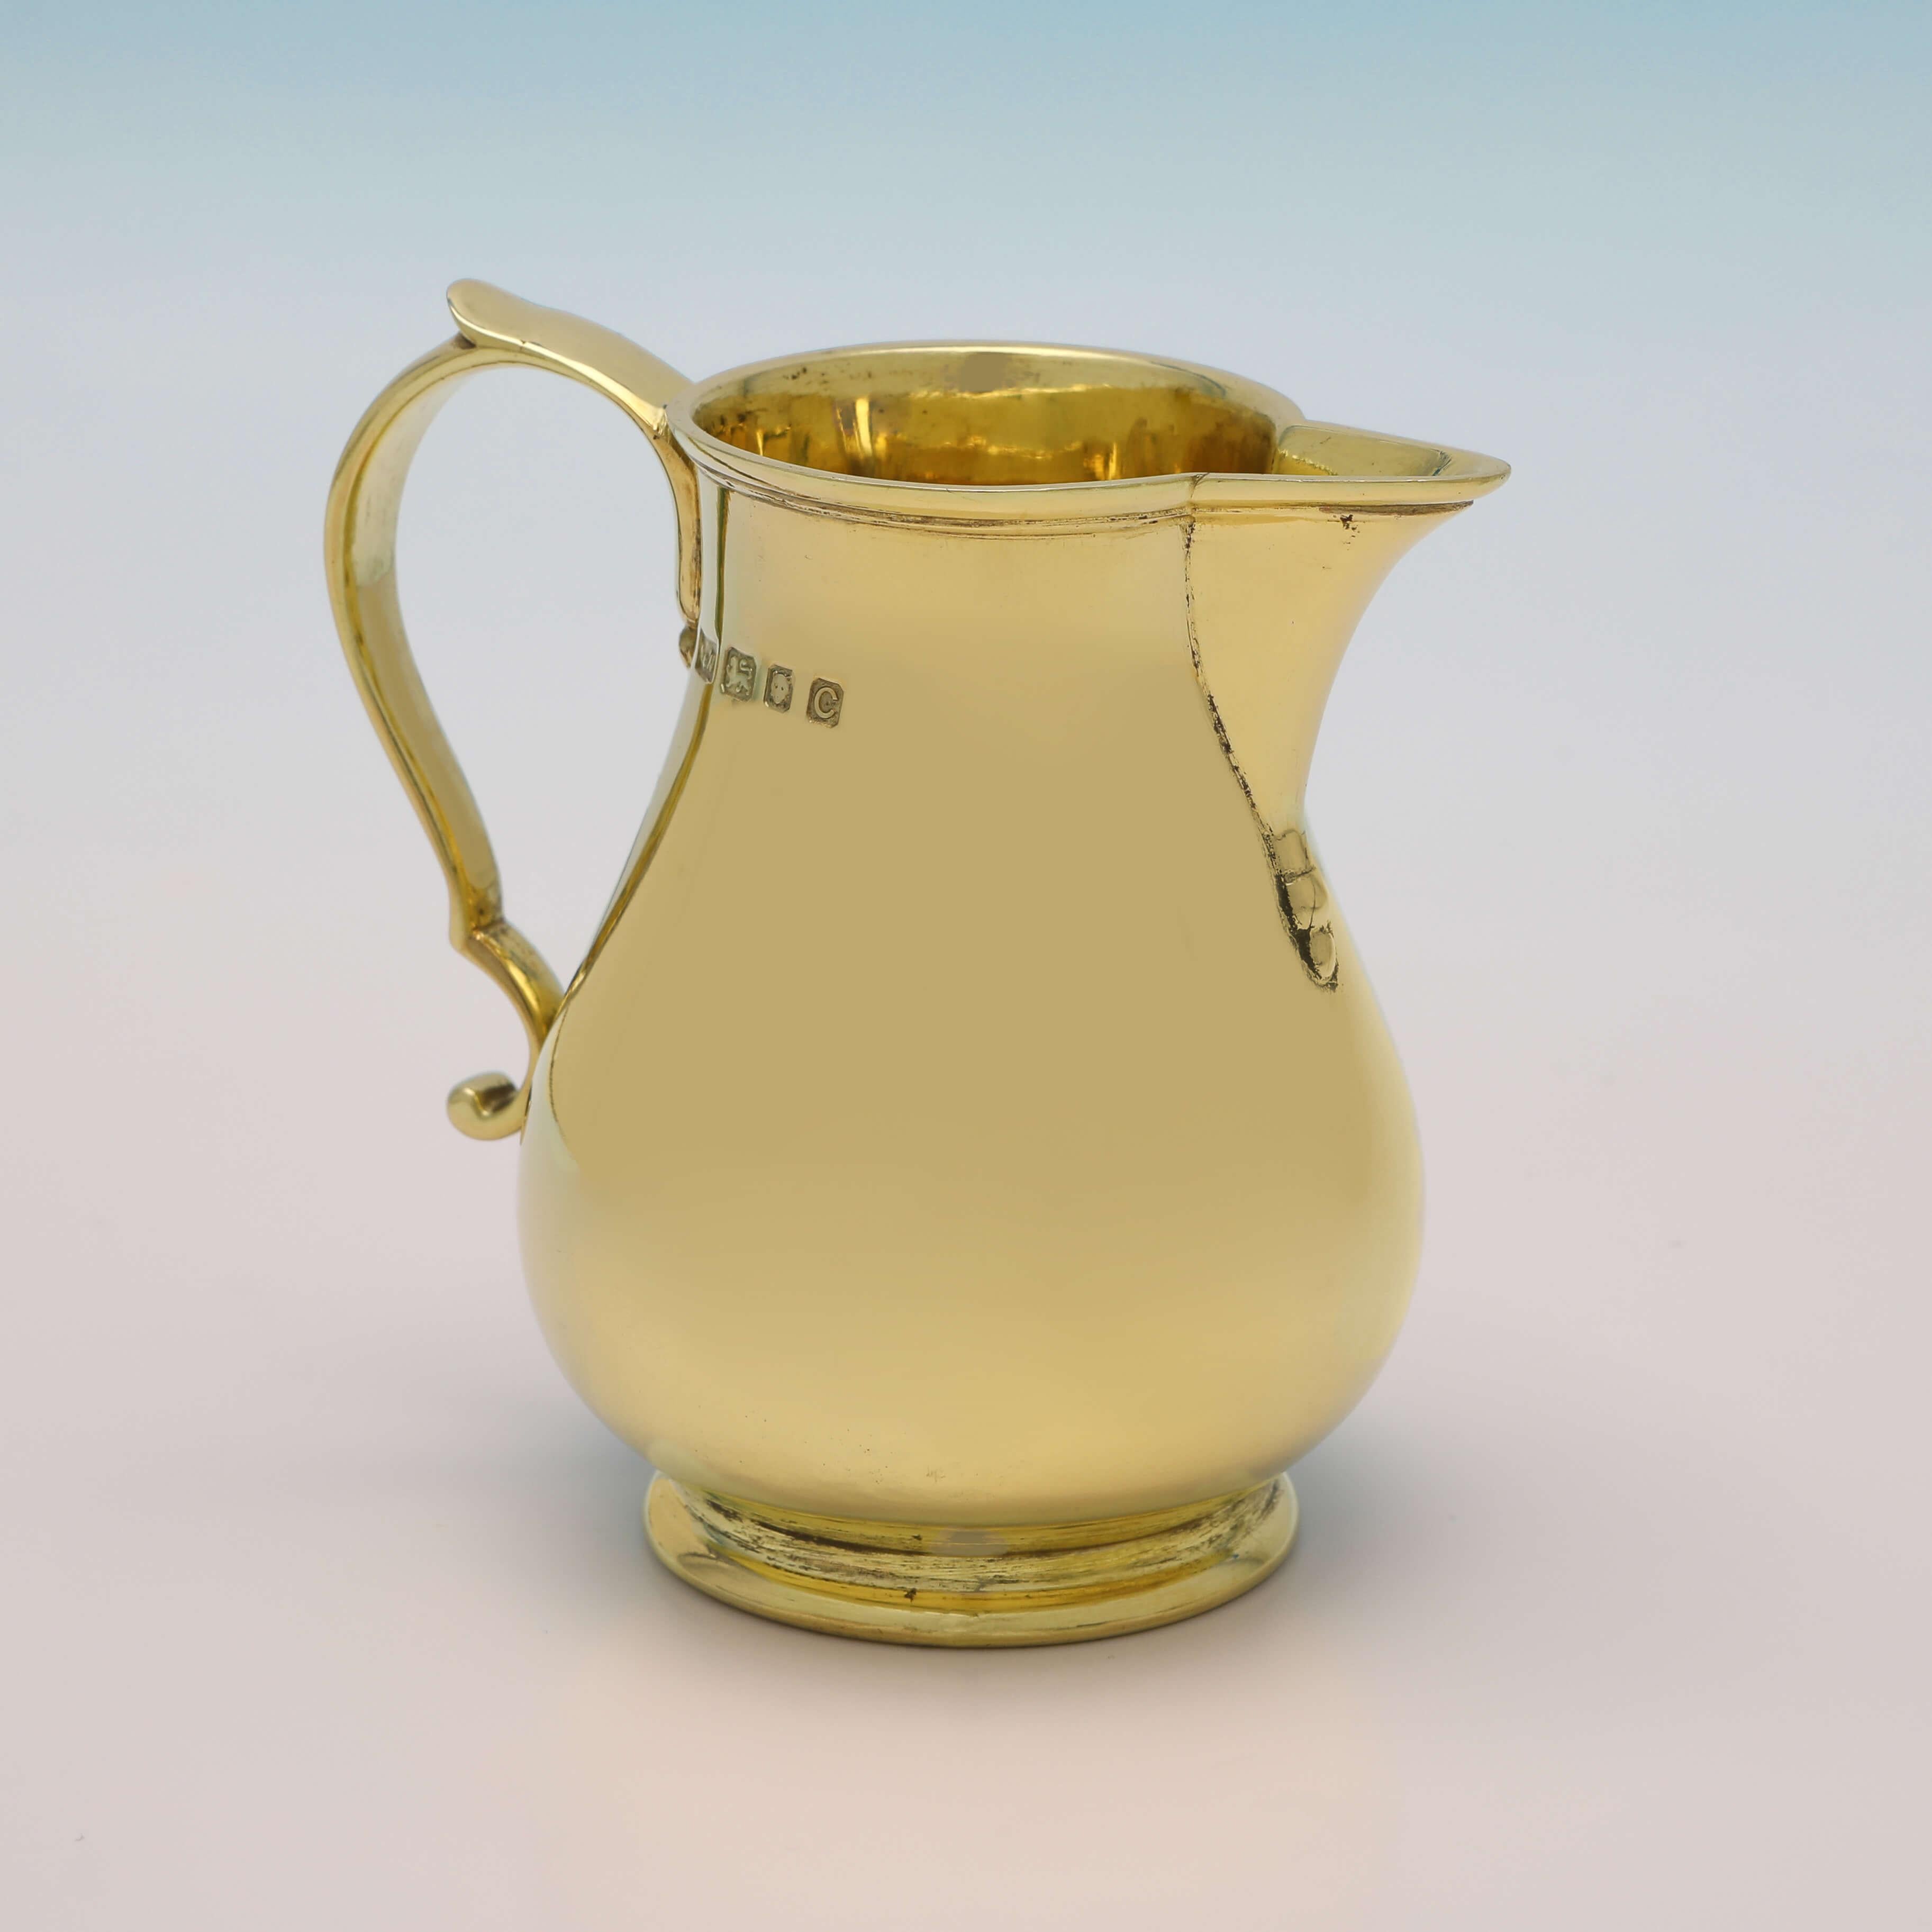 Hallmarked in London in 1938 by Walter H. Wilson Ltd., this handsome, Sterling Silver Cream Jug, is in the 'Sparrow beak' style, and is gold plated. The cream jug measures 3